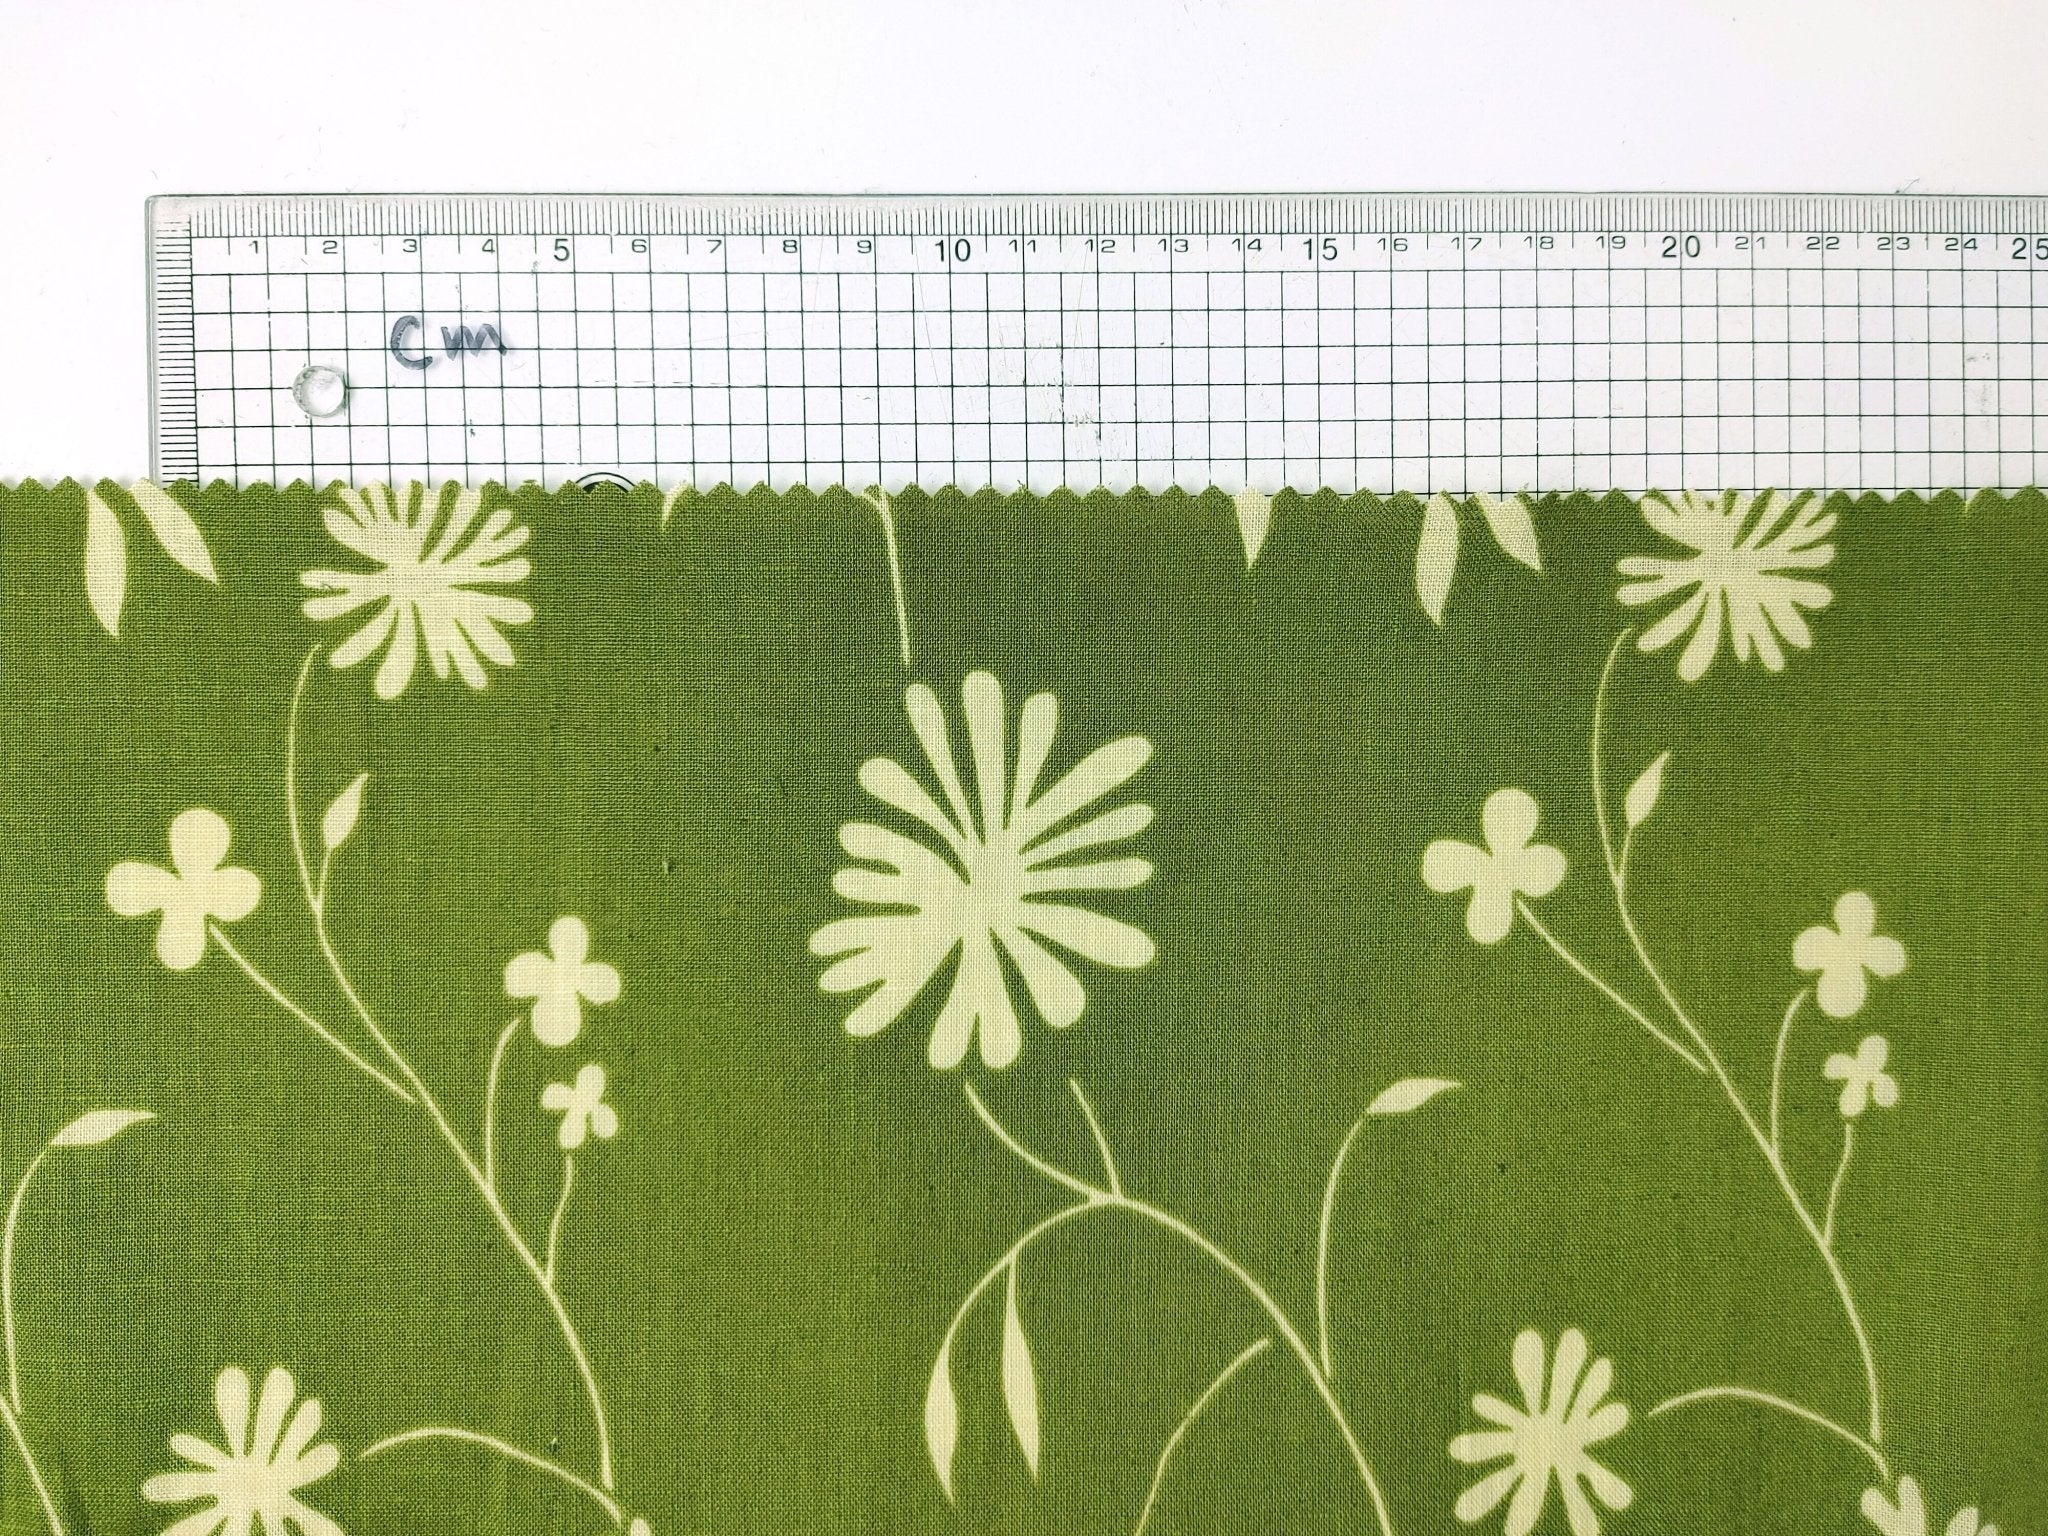 Linen Cotton Blended Fabric with Green Leaf Print (978) - The Linen Lab - Green